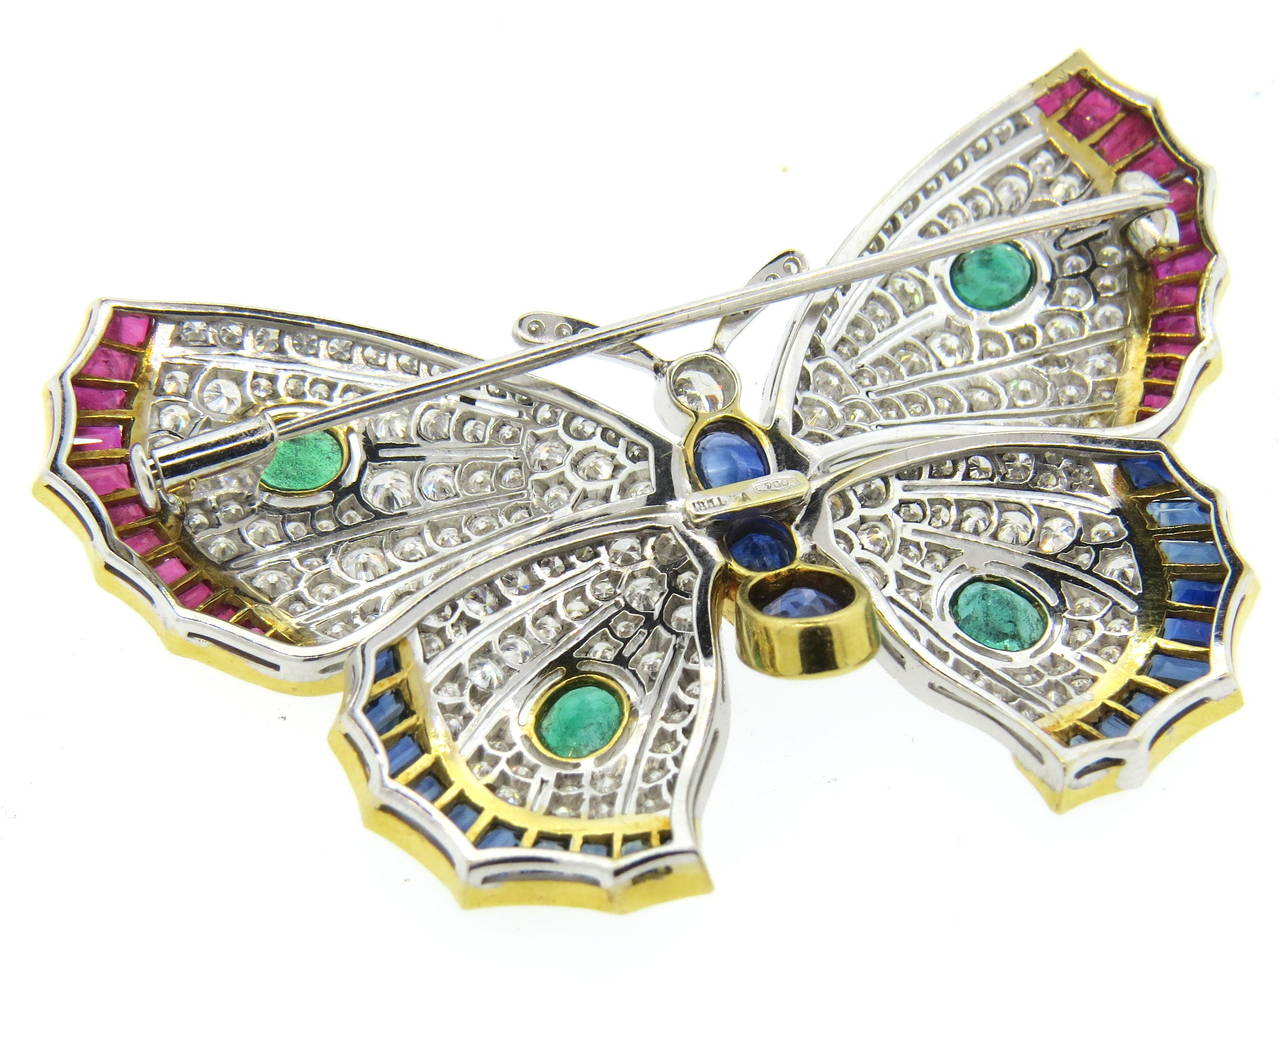 18k gold butterfly brooch, set with approximately 6.60ctw in diamonds, sapphires, rubies and emeralds. Brooch measures 65mm x 43mm. Weight - 23.5gr